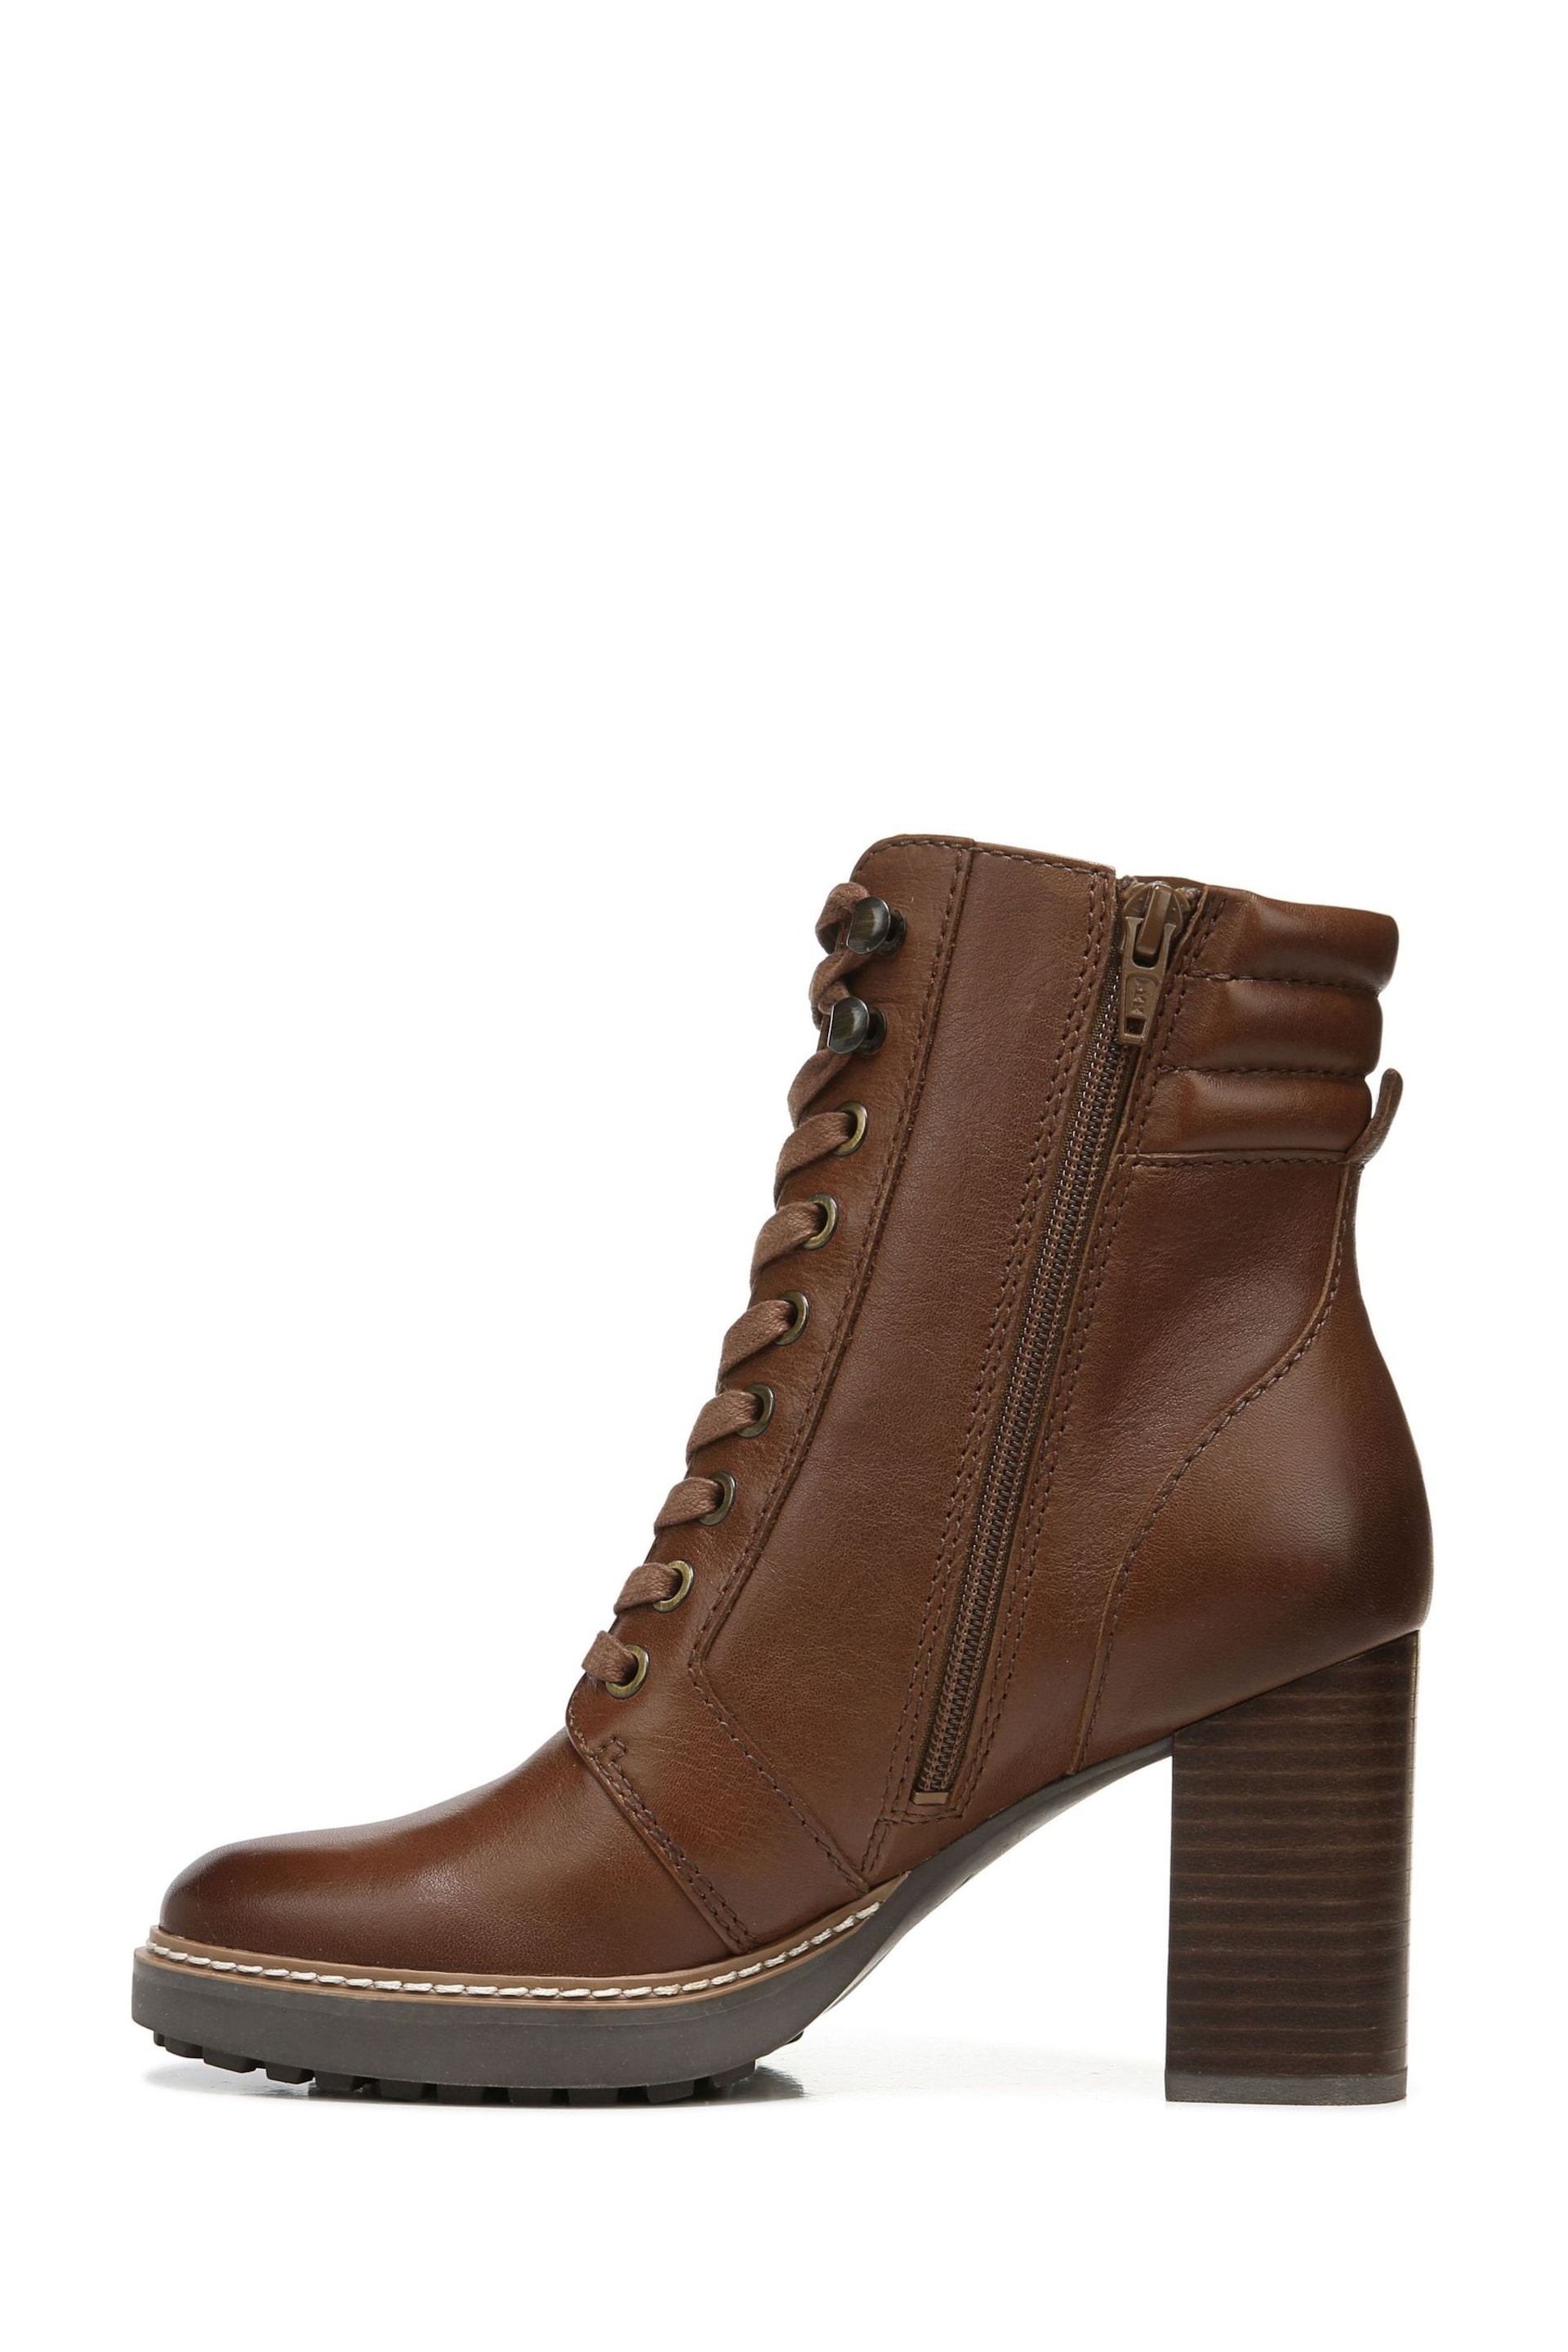 Naturalizer Callie Ankle Leather Boots - Image 2 of 7